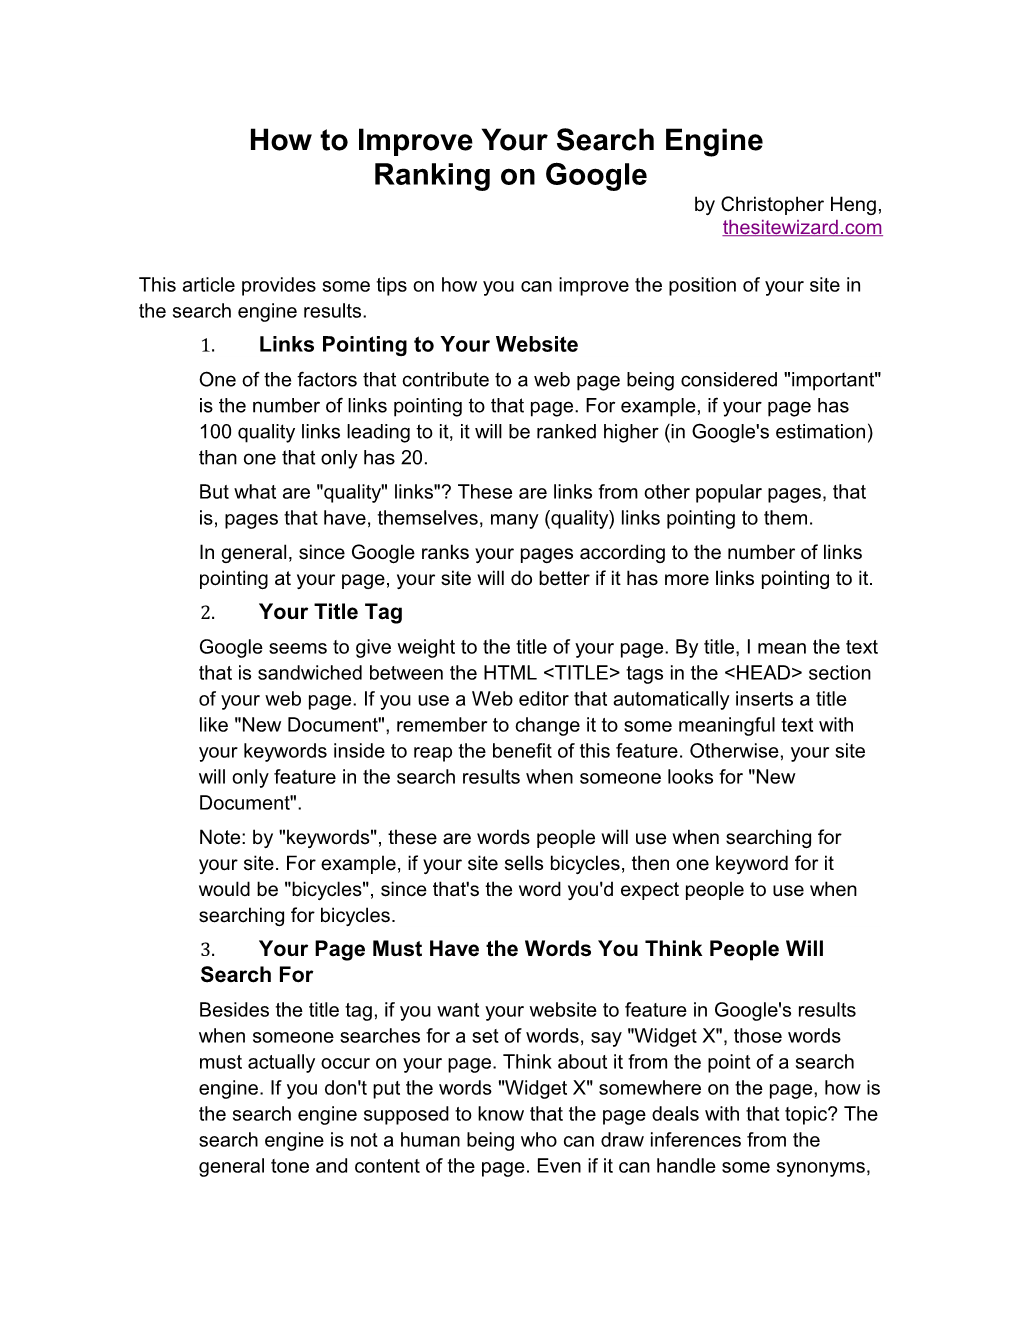 How to Improve Your Search Engine Ranking on Google